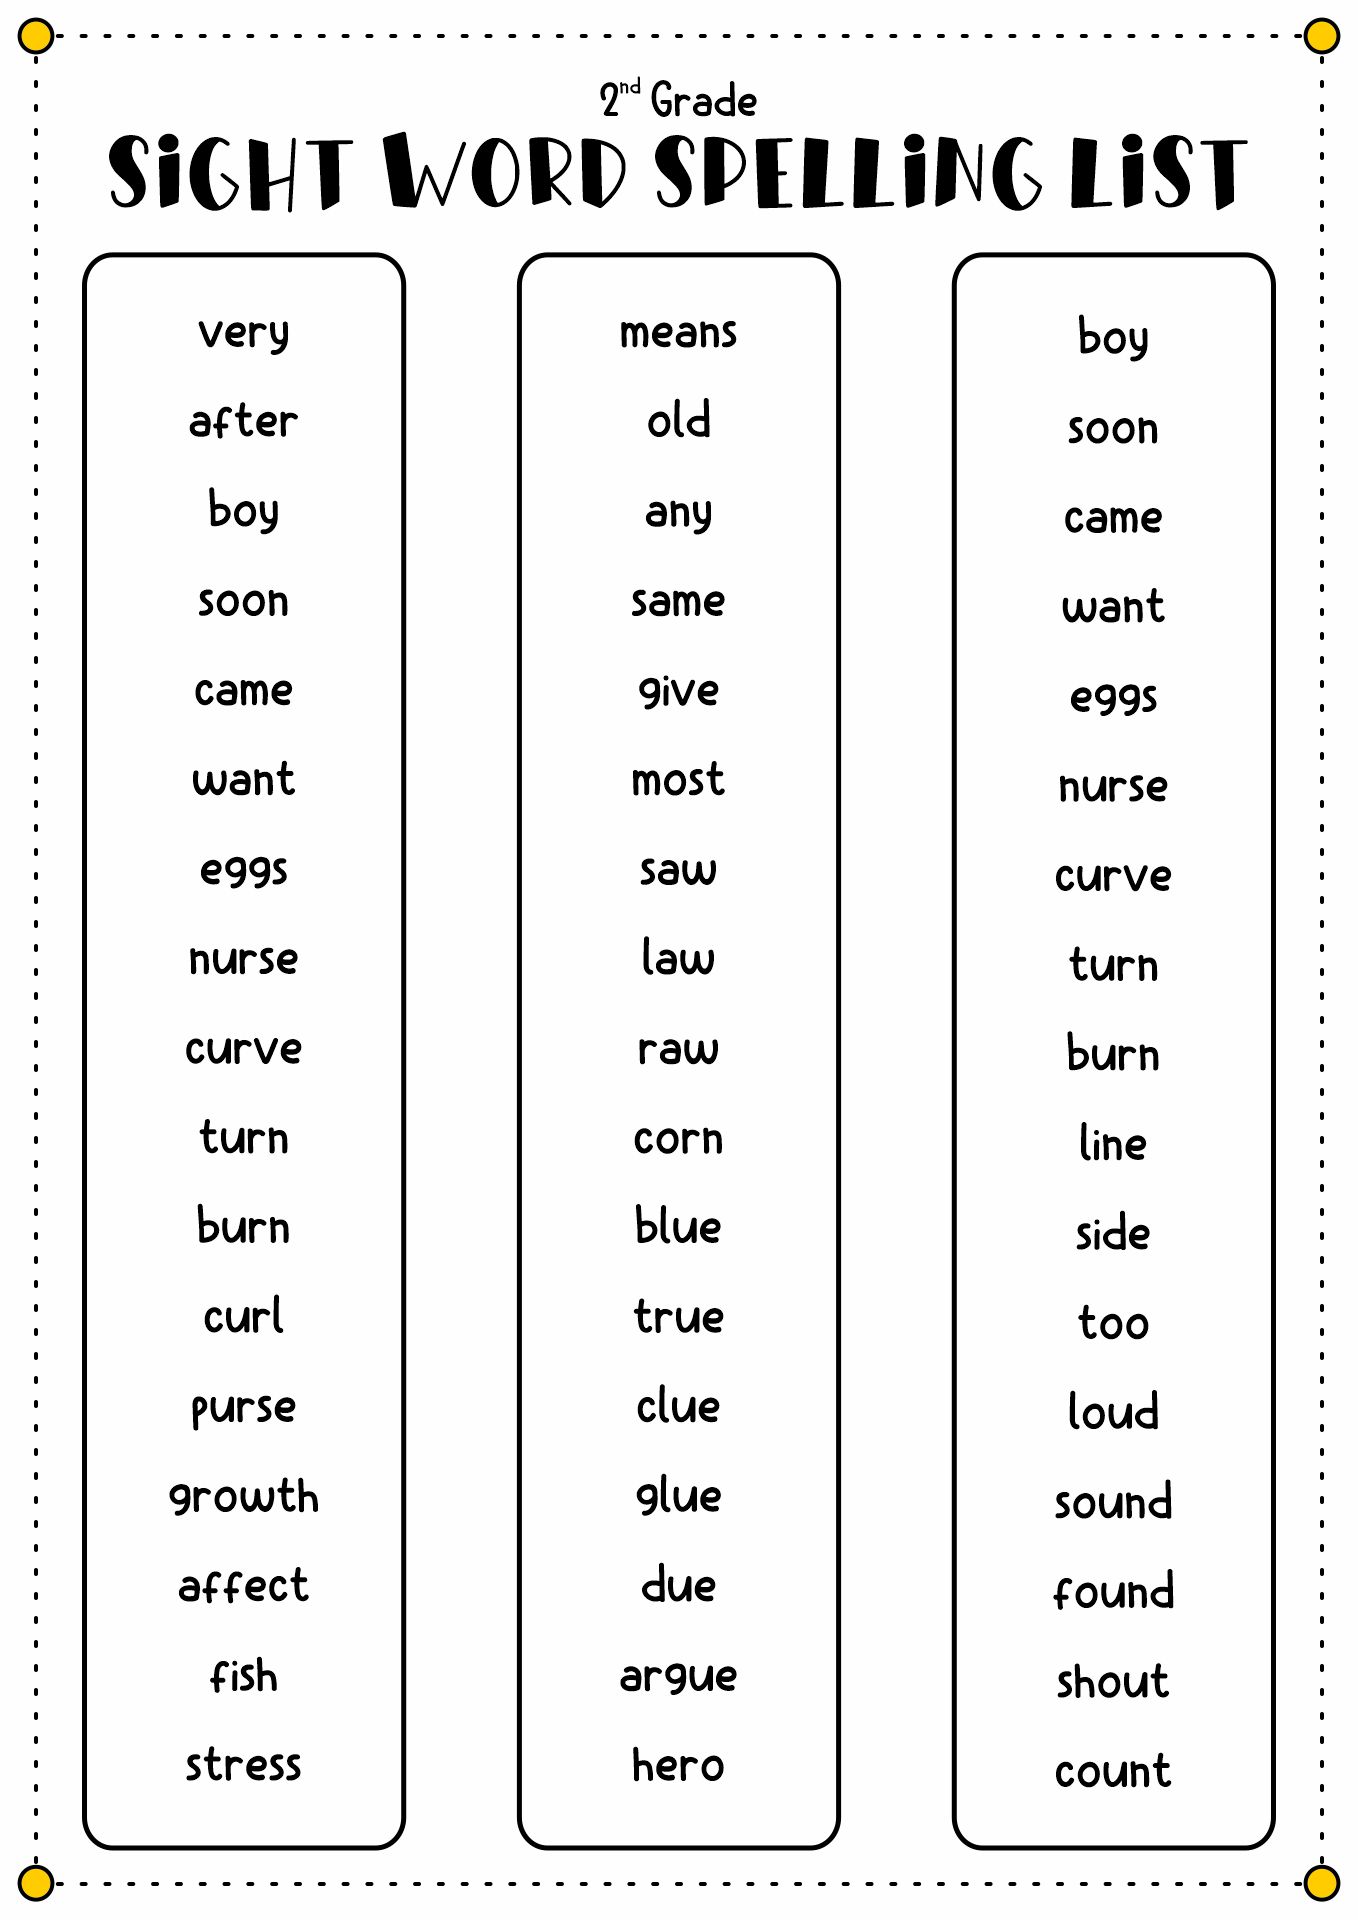 Spelling for 2nd Grade Sight Word List Image